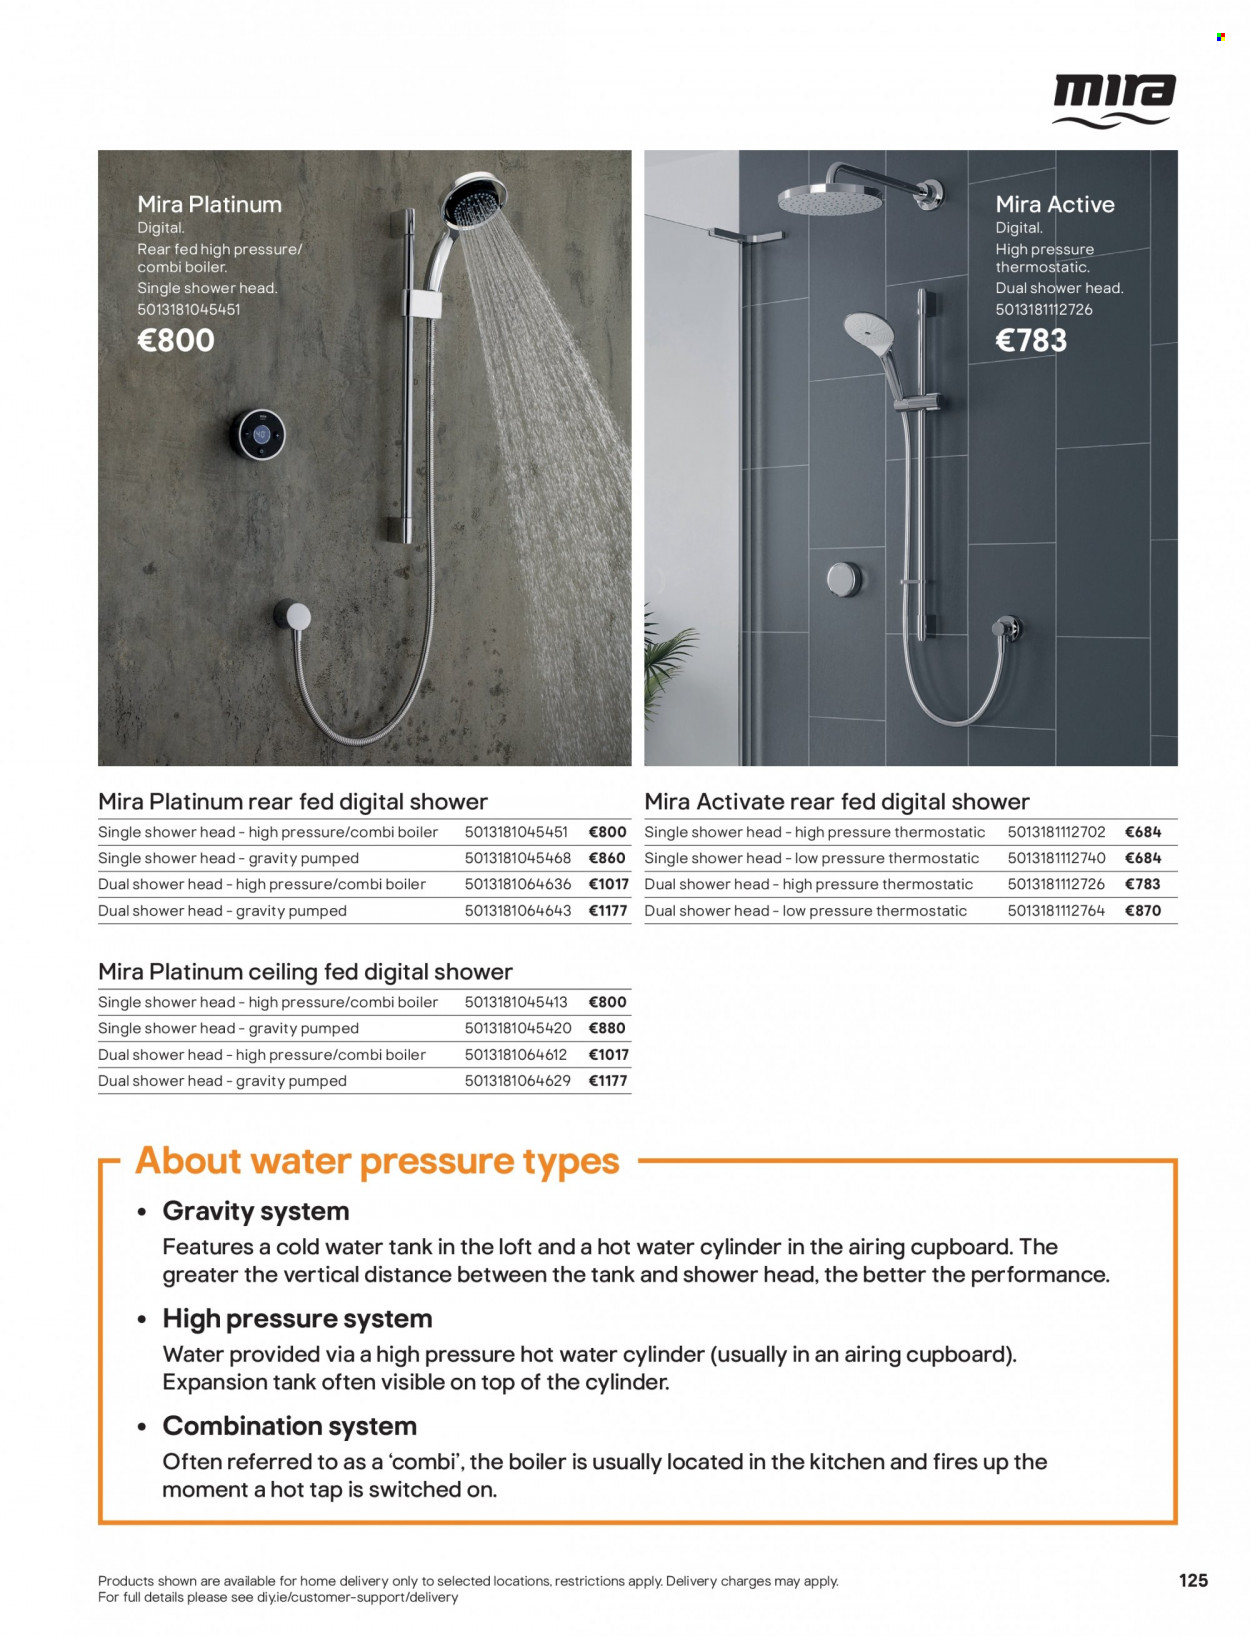 B&Q offer  - Sales products - showerhead. Page 125.